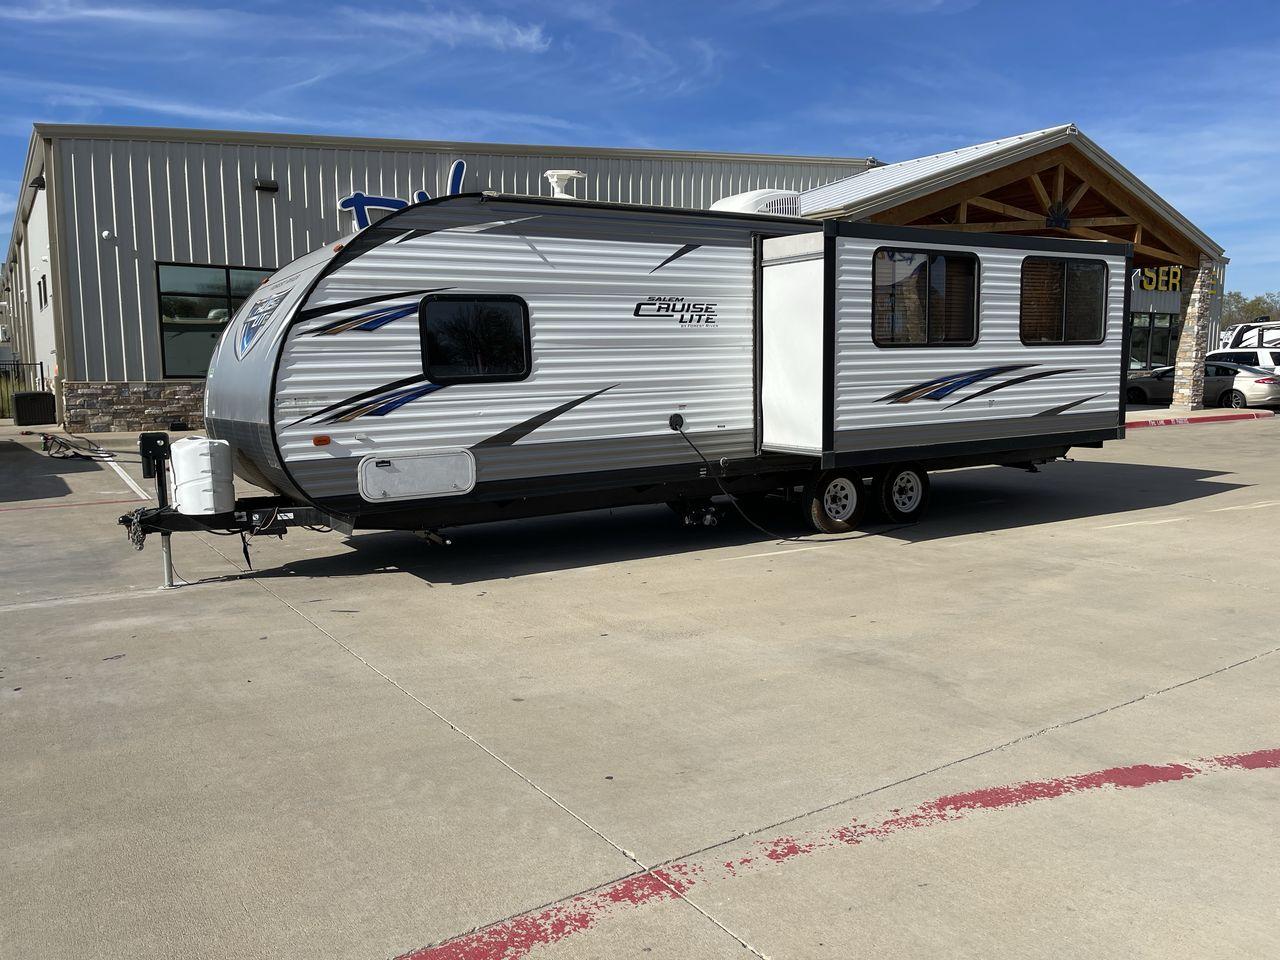 2017 WHITE FOREST RIVER SALEM CRUISE LITE 25 (4X4TSMA2XH7) , Length: 30.92 ft. | Dry Weight: 6,063 lbs. | Gross Weight: 7,685 lbs. | Slides: 1 transmission, located at 4319 N Main Street, Cleburne, TX, 76033, (817) 221-0660, 32.435829, -97.384178 - Introducing the 2017 Forest River Salem Cruise Lite 254RLXL, a meticulously crafted travel trailer that will revolutionize your camping adventures. This model offers a great balance between spaciousness and ease of towing, with a length of 30.92 feet and a dry weight of 6,063 lbs. The Salem Cruise L - Photo #22